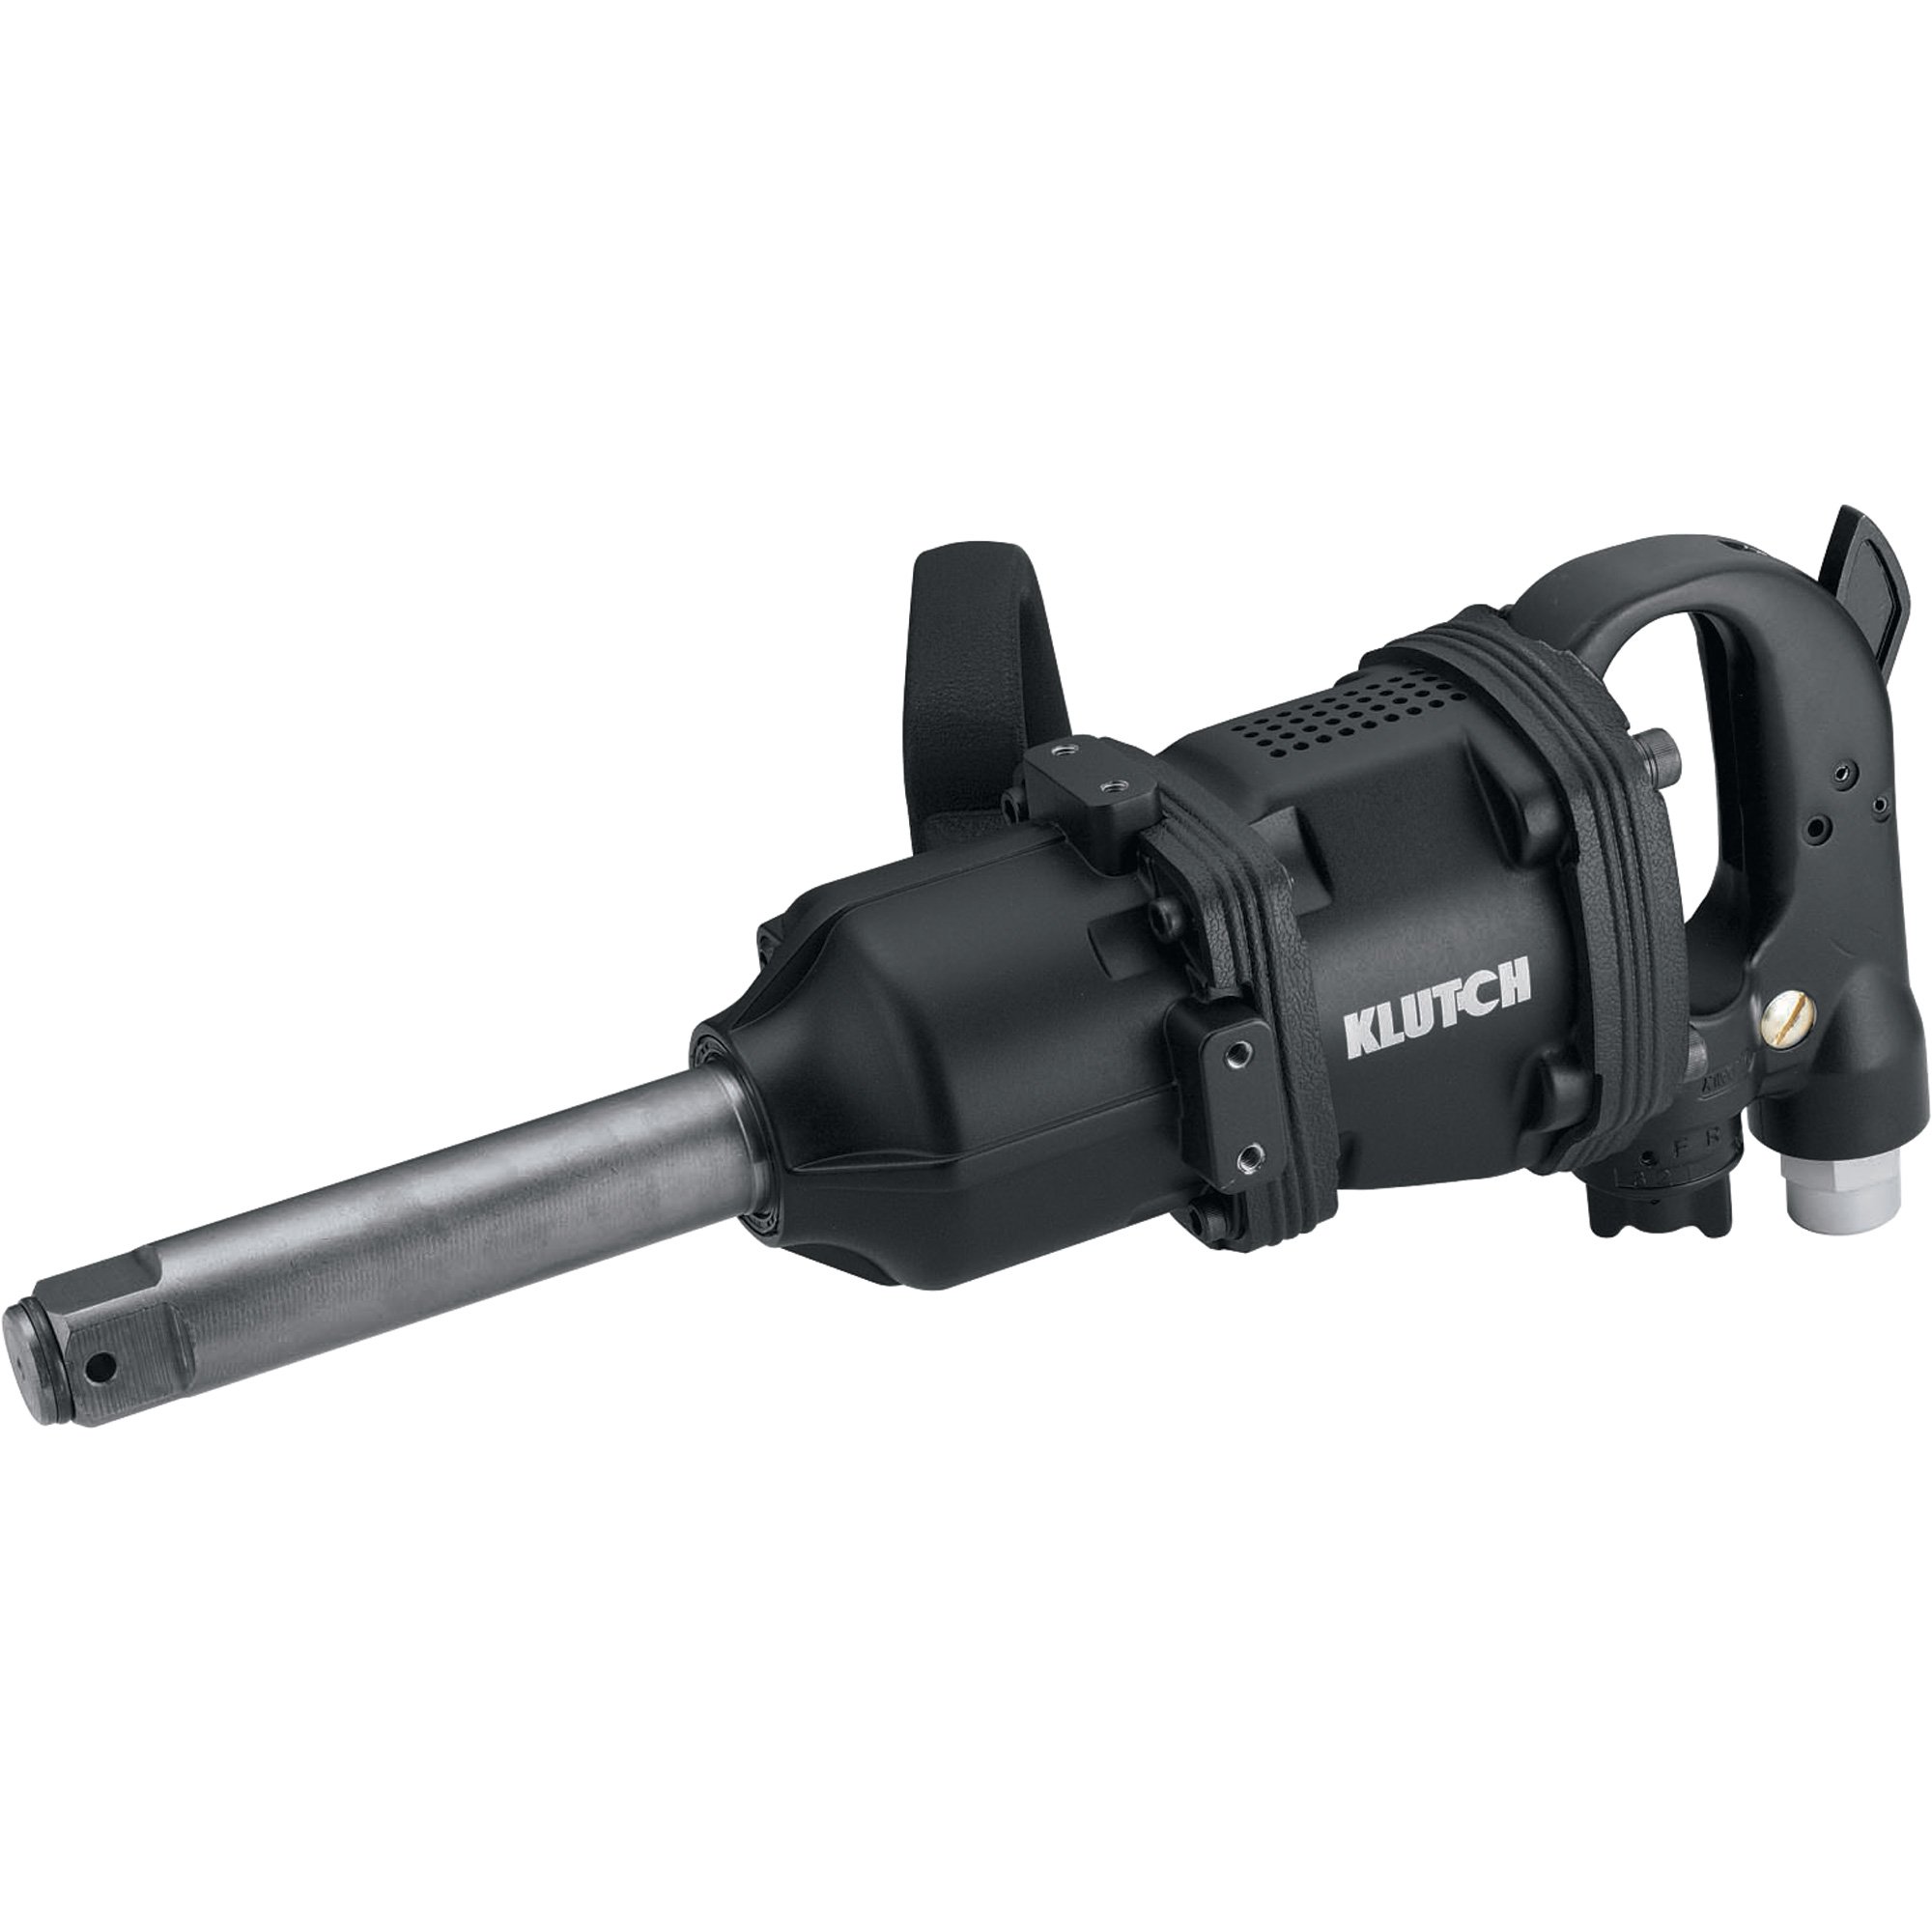 Klutch Heavy-Duty Air Impact Wrench 1in. Drive, 2500 Ft.-Lbs. Torque,  5,000 RPM, 8in. Anvil by Klutch